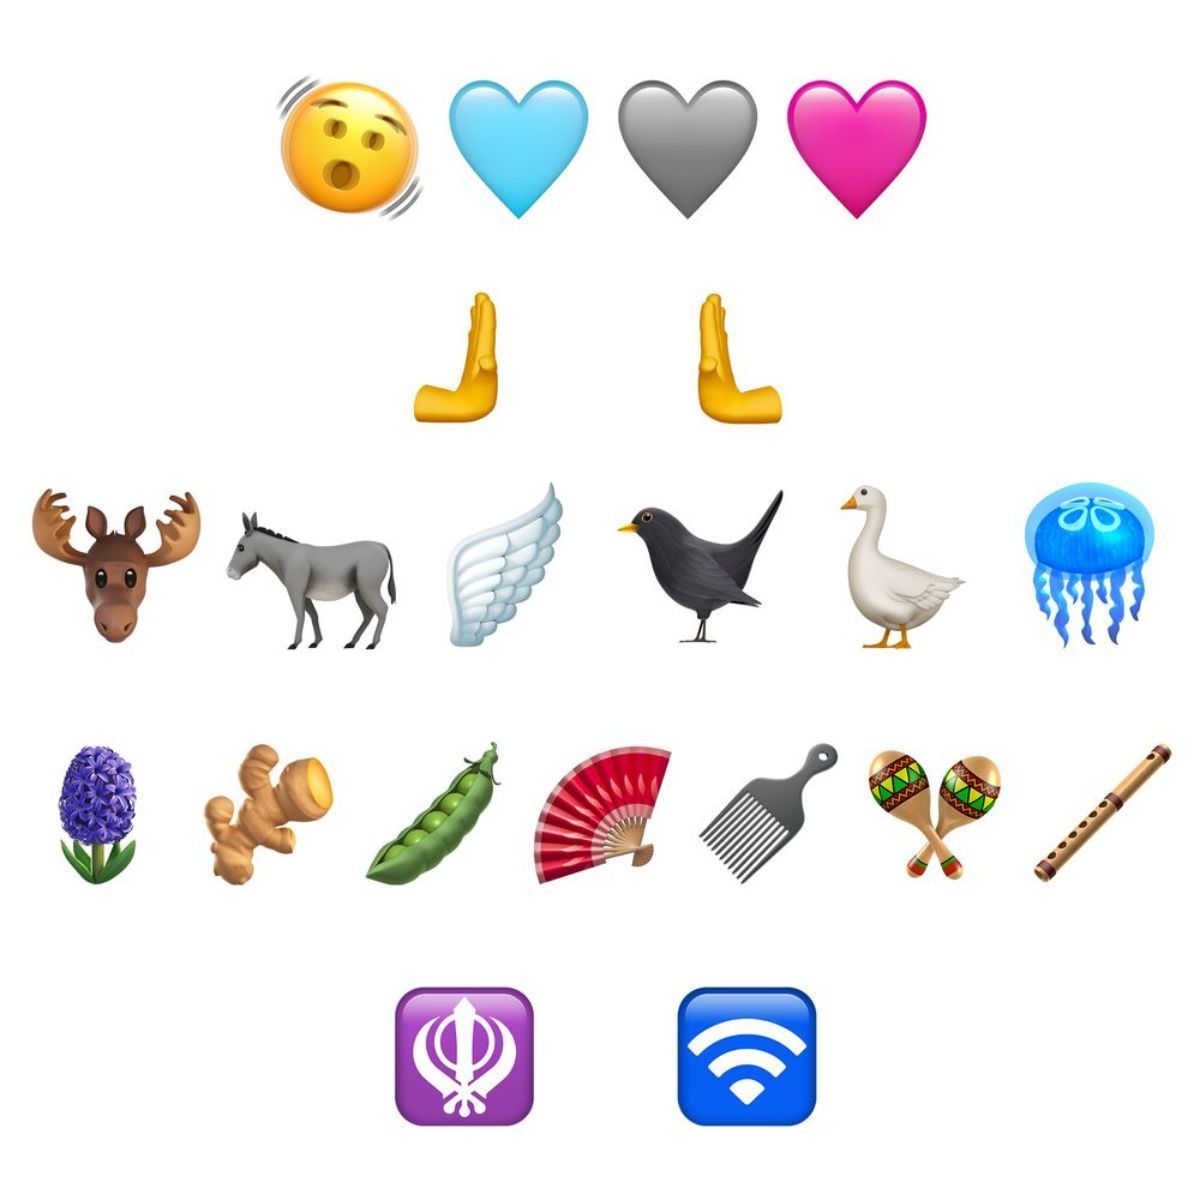 the-upcoming-ios-16.4-will-come-with-31-new-emojis